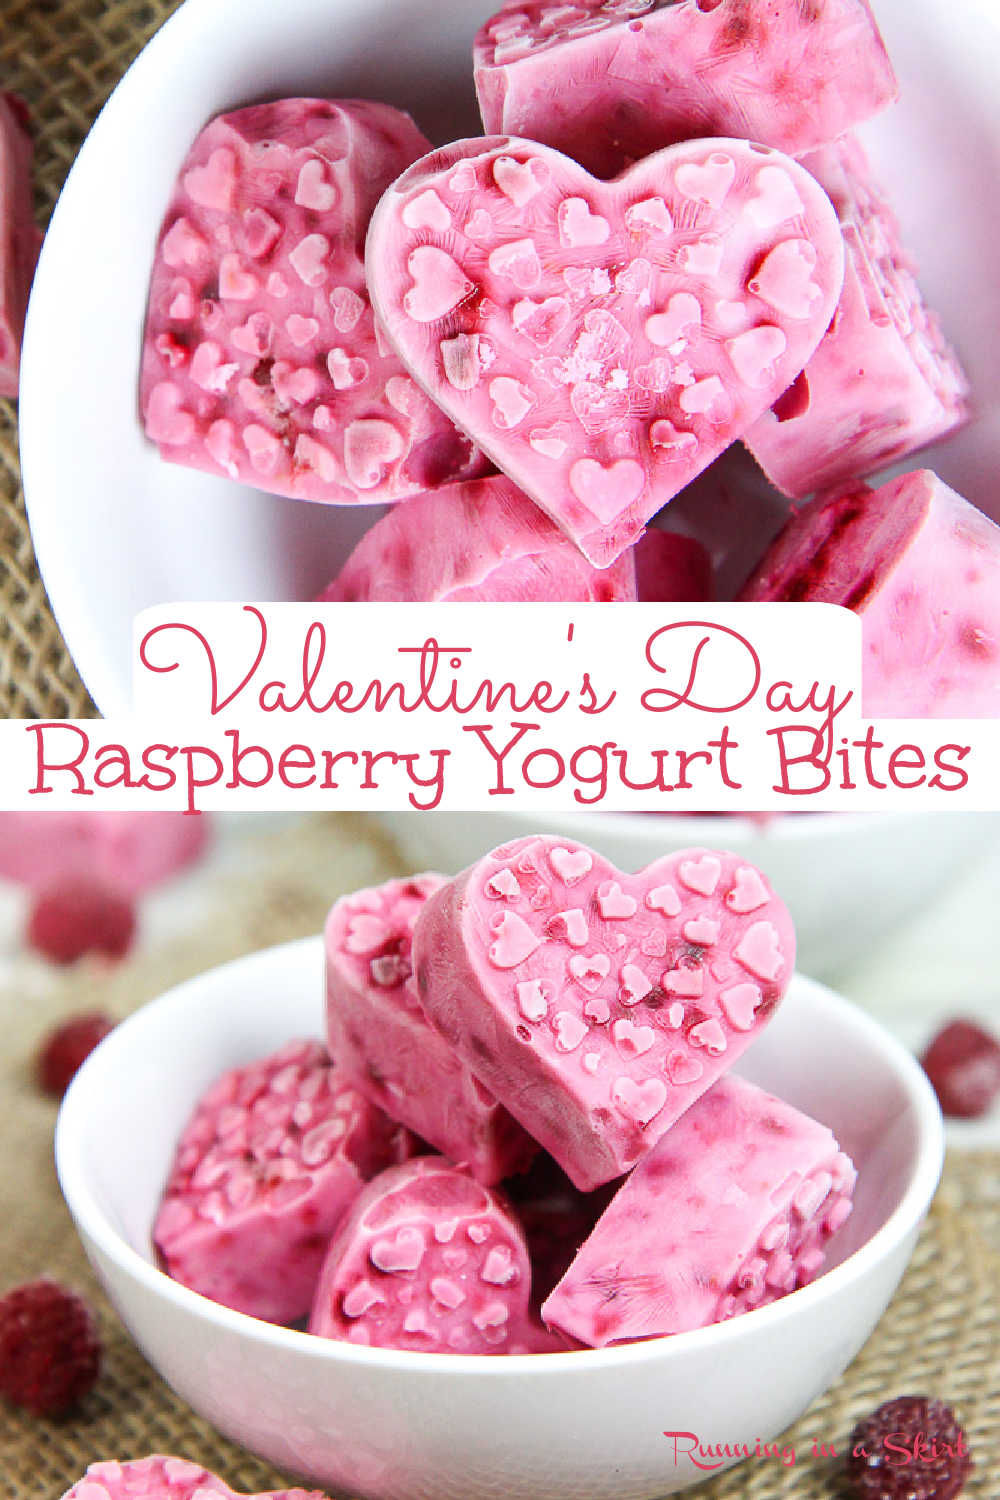 4 Ingredient Healthy, Frozen Raspberry Greek Yogurt Bites. The perfect fruit filled, gluten free, vegetarian low carb snack ideas for Valentine's Day. These easy, homemade and cute heart shaped DIY treats for kids or for adults only take 10 minutes to make. / Running in a Skirt via @juliewunder